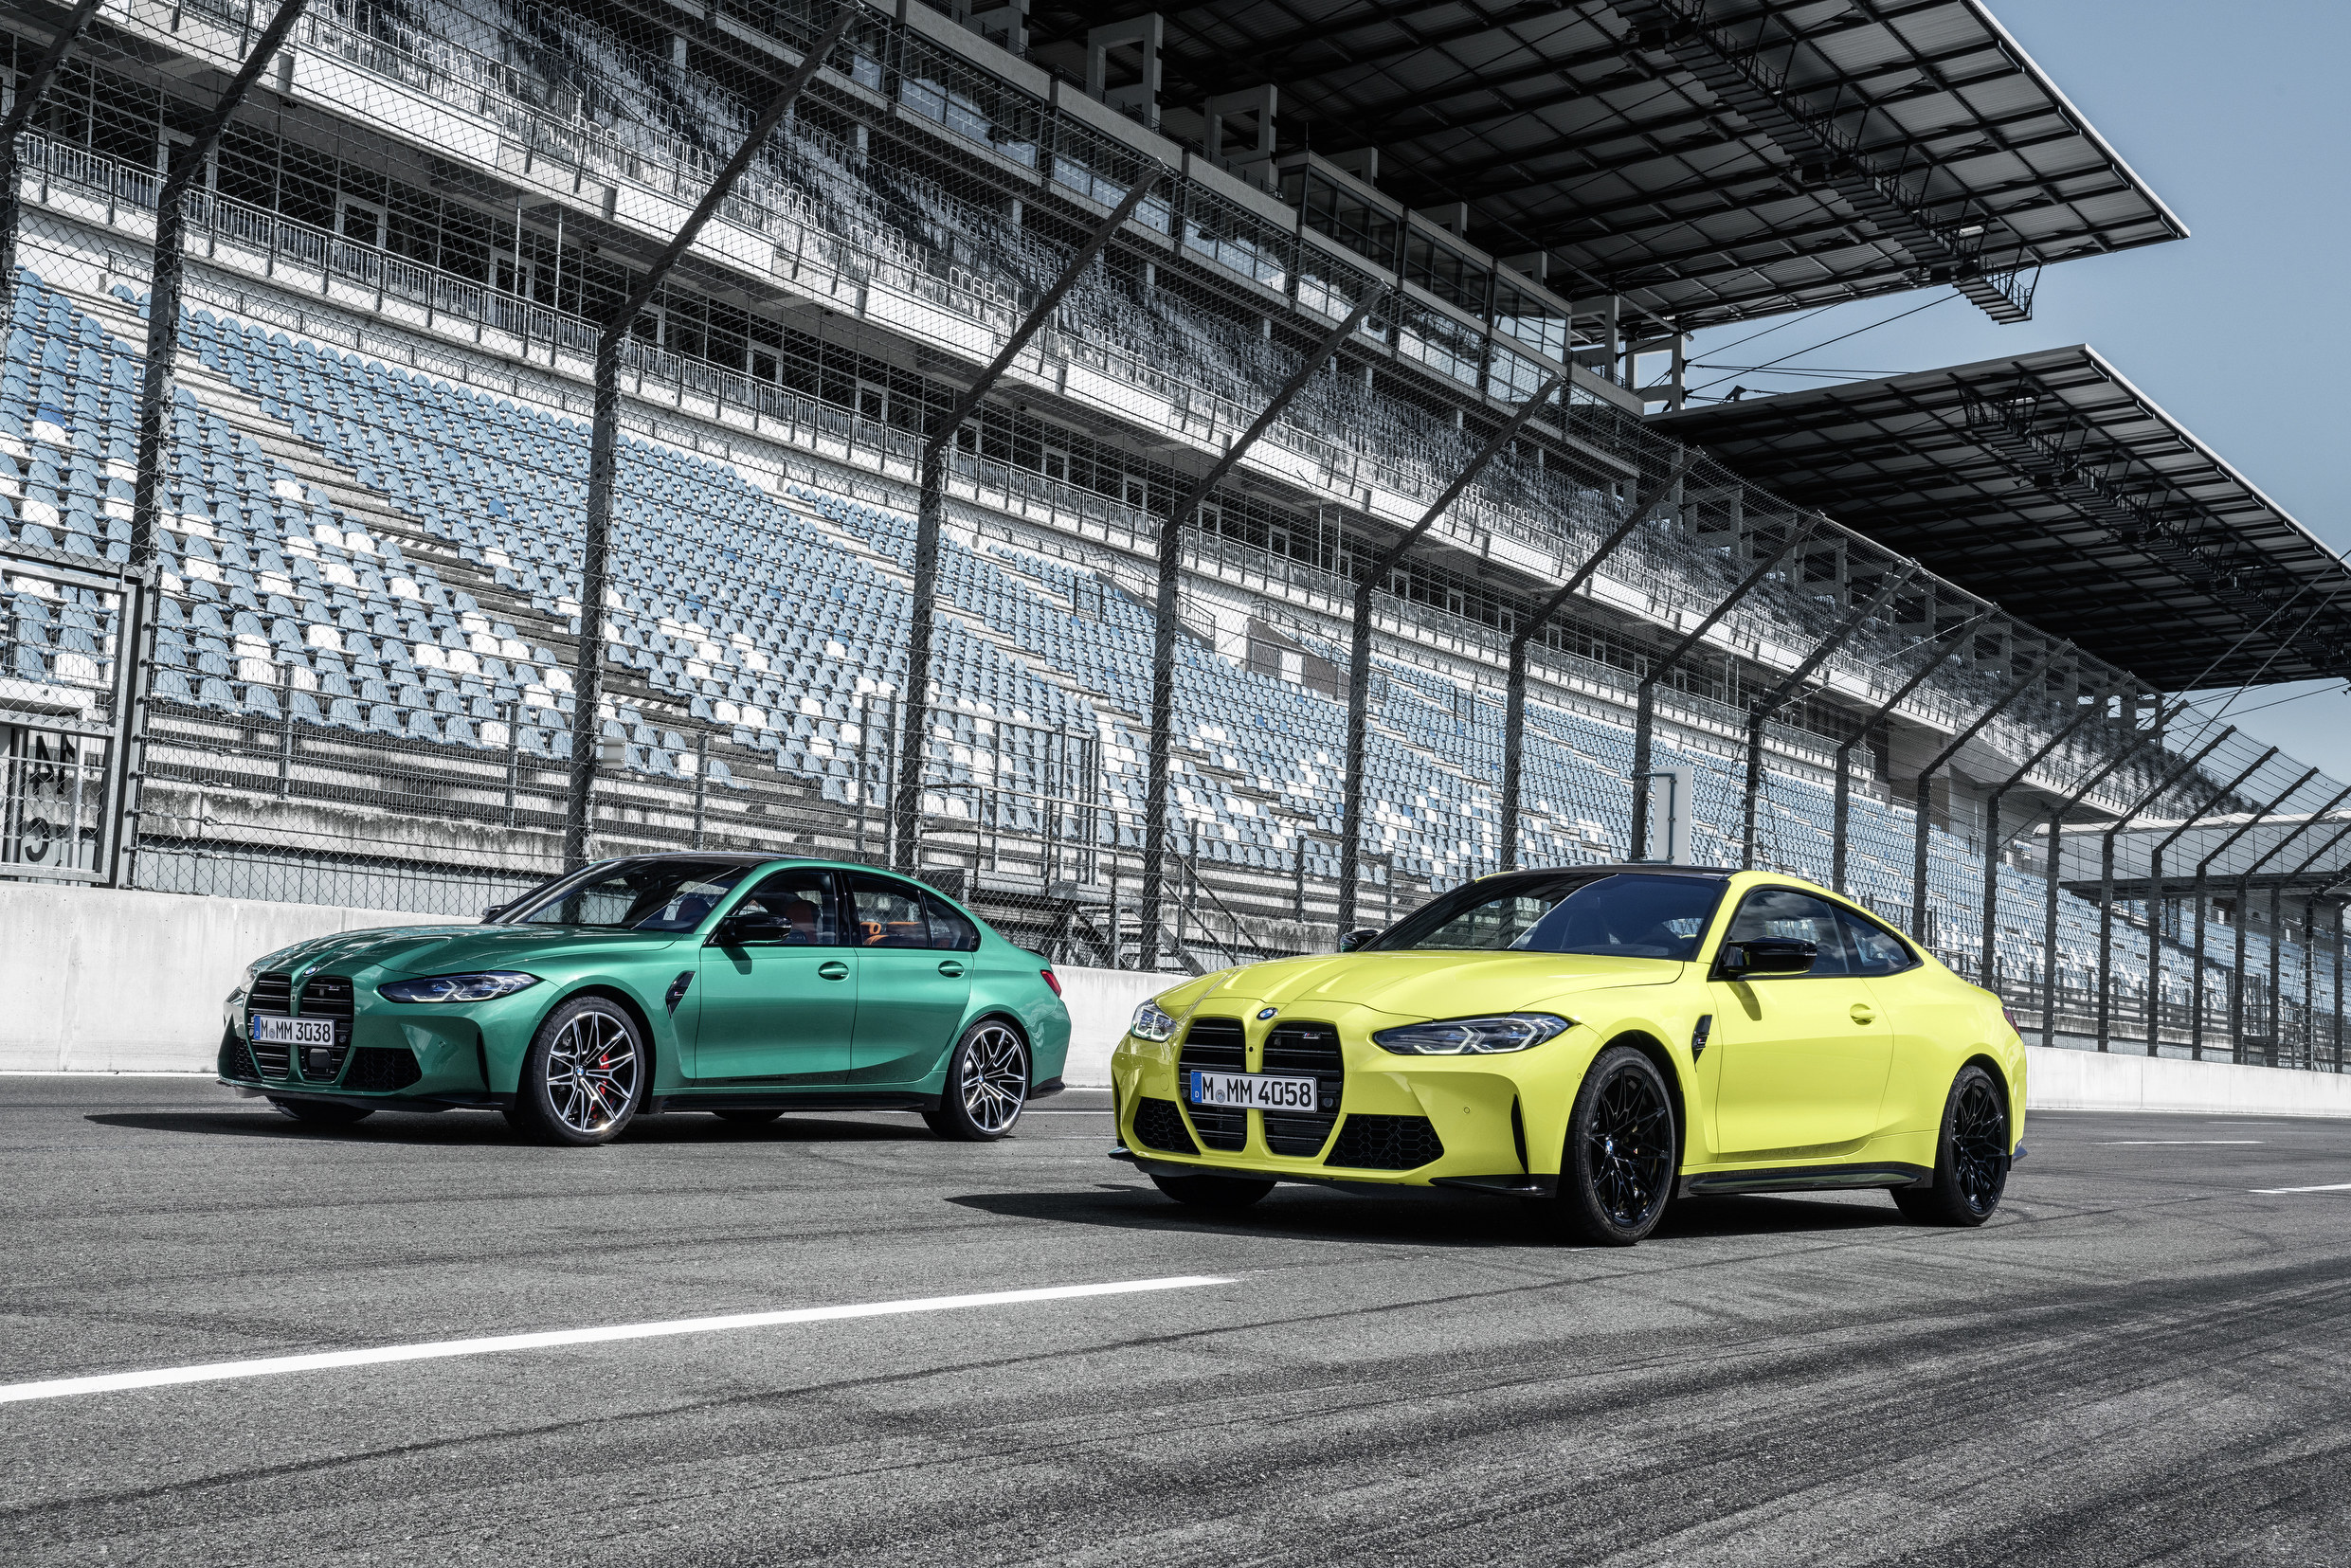 BMW Unveils New Generation M3 Sedan and M4 Coupe